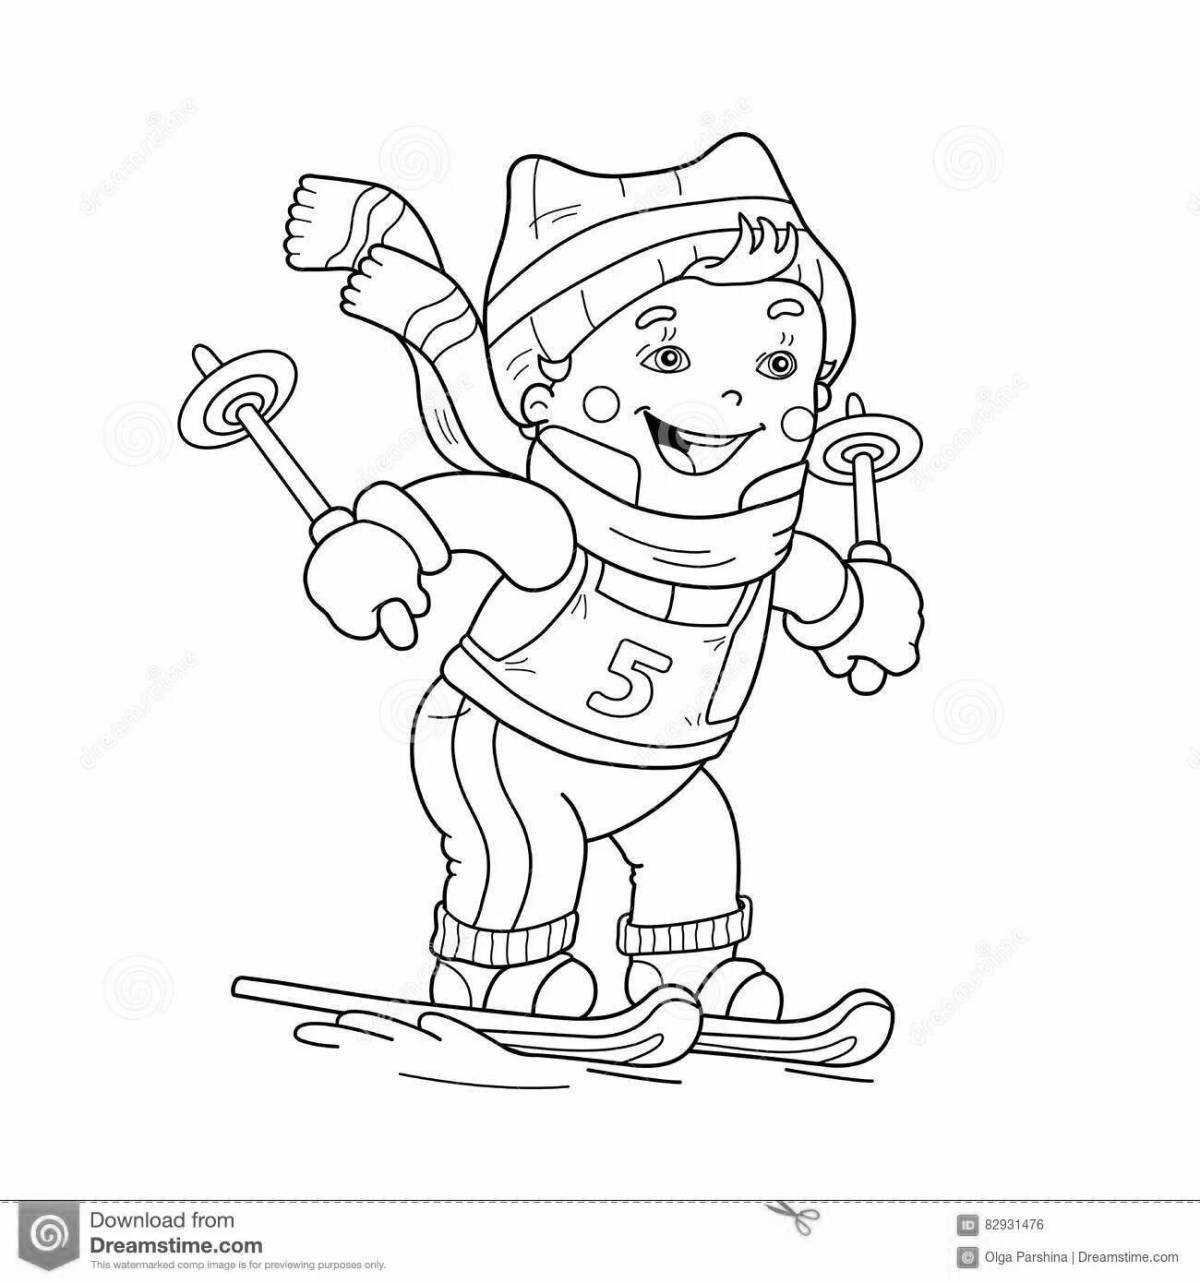 Playful skier coloring book for 6-7 year olds